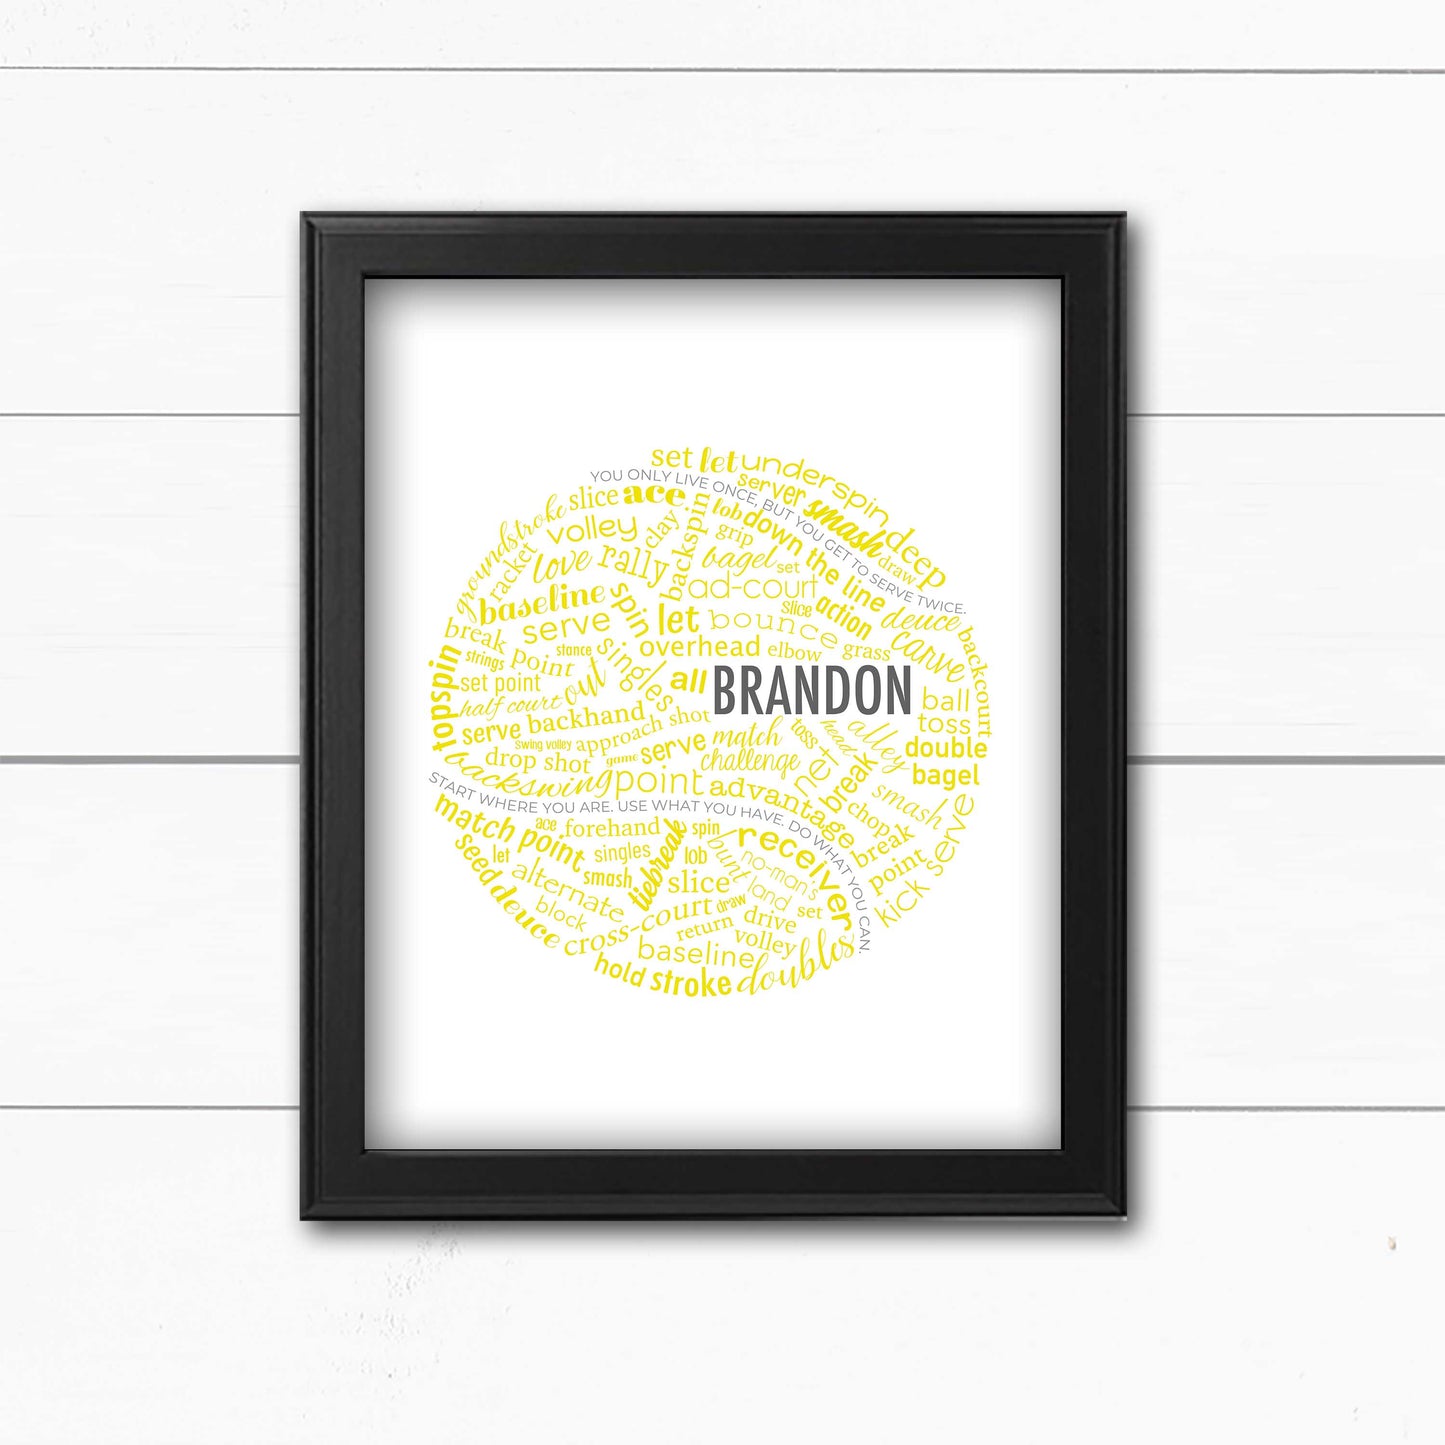 personalized tennis ball art for coach or team